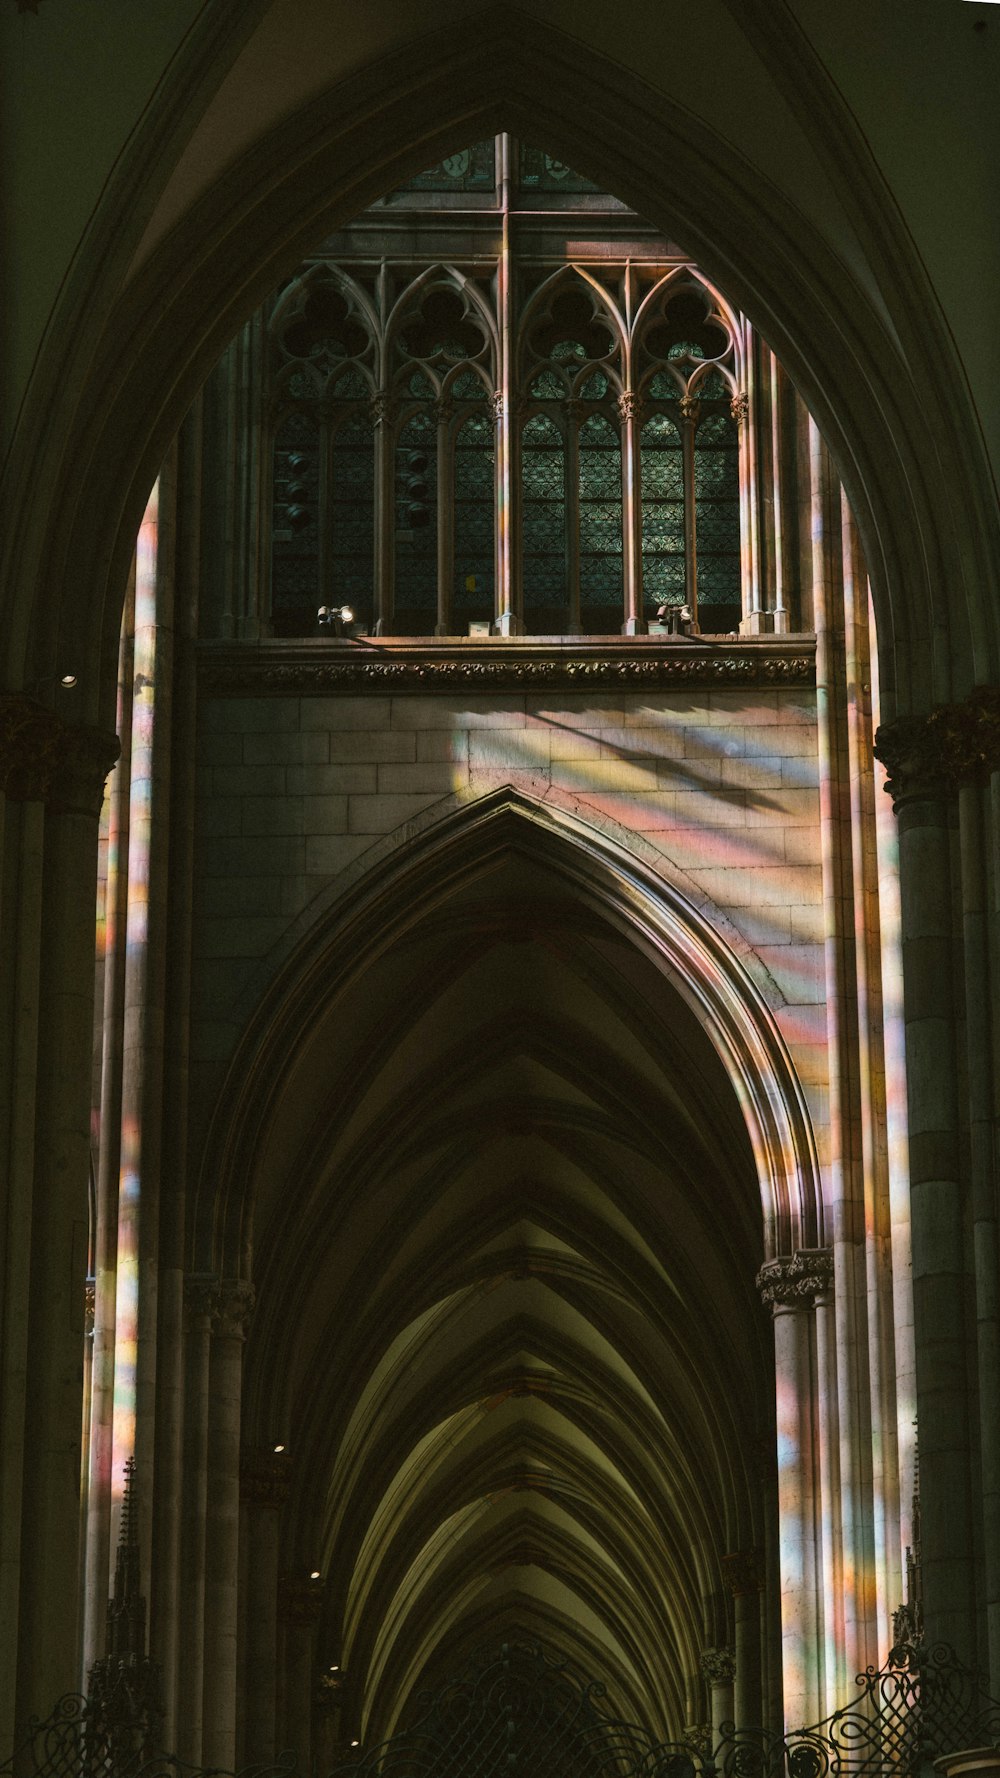 the sunlight is shining through the stained glass windows